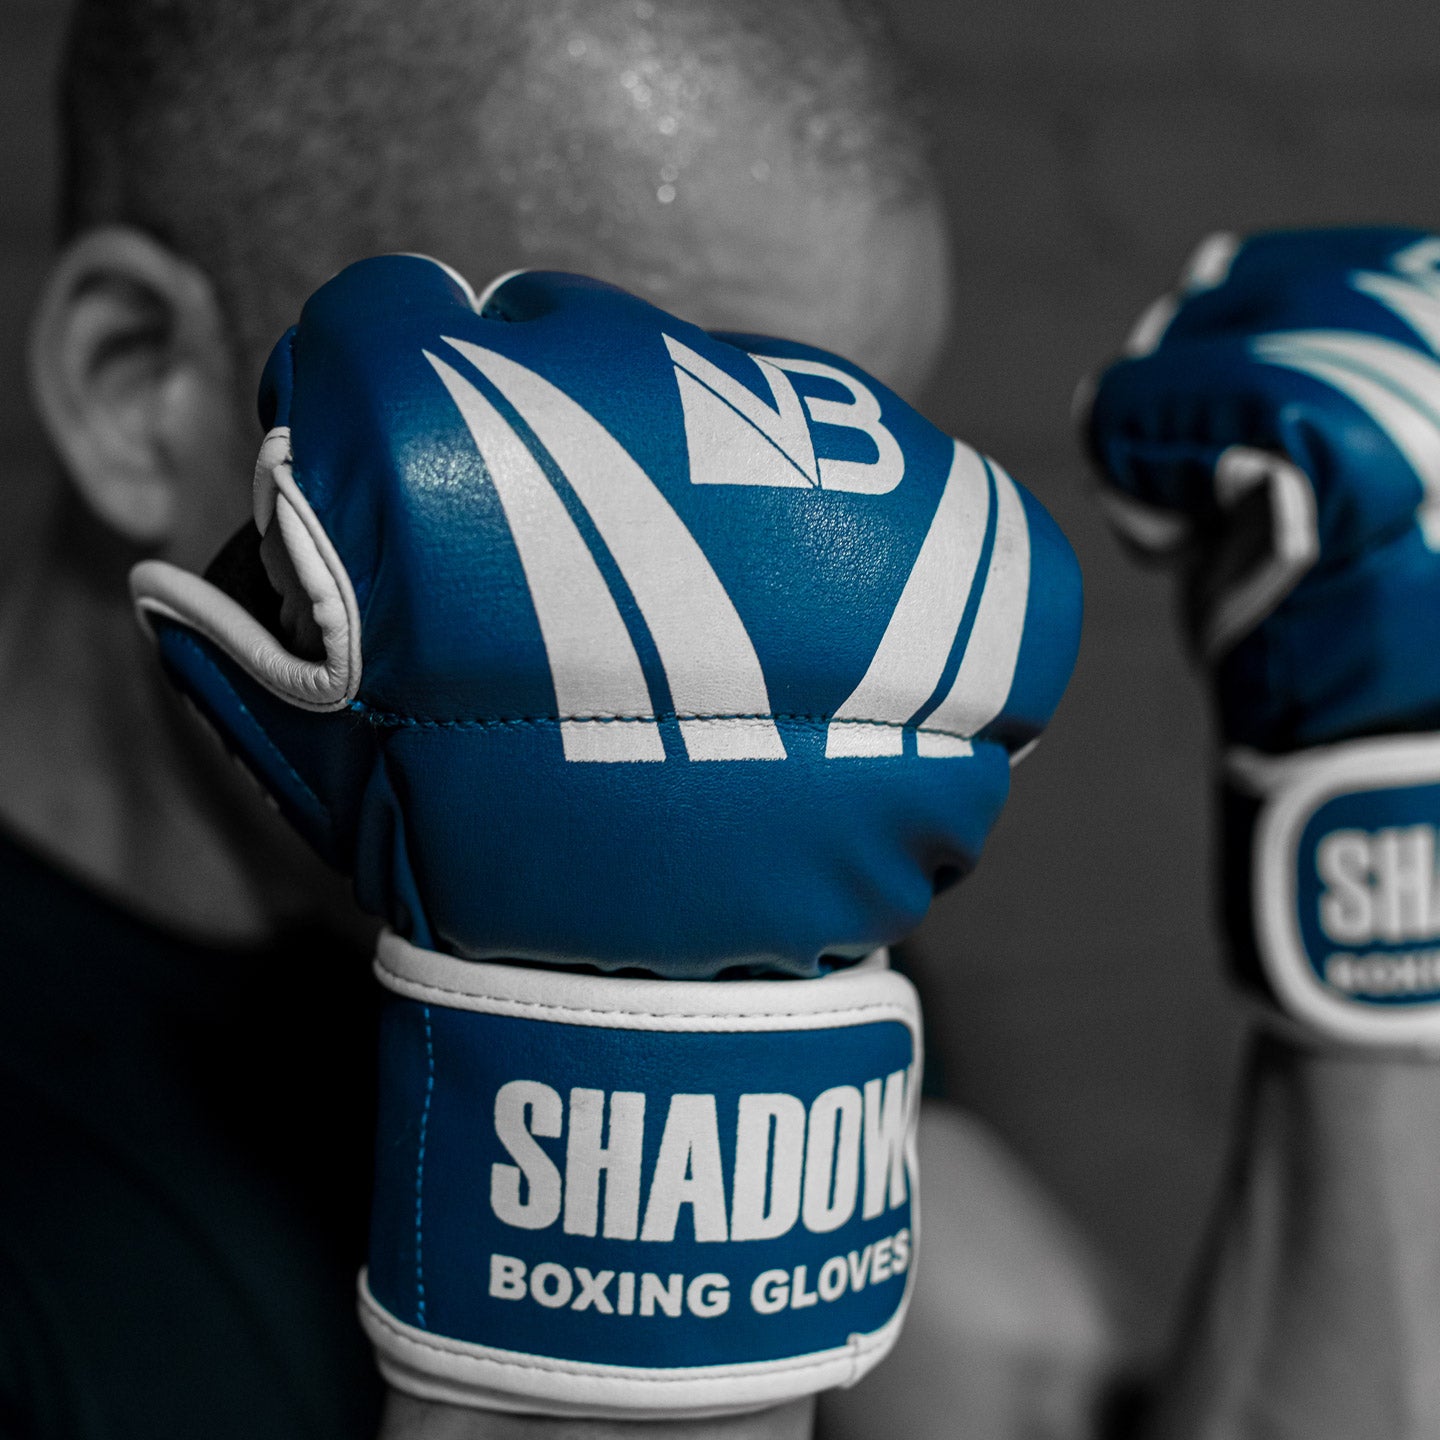 Beginner Shadow Boxing Workout Series - Nate Bower Elevated